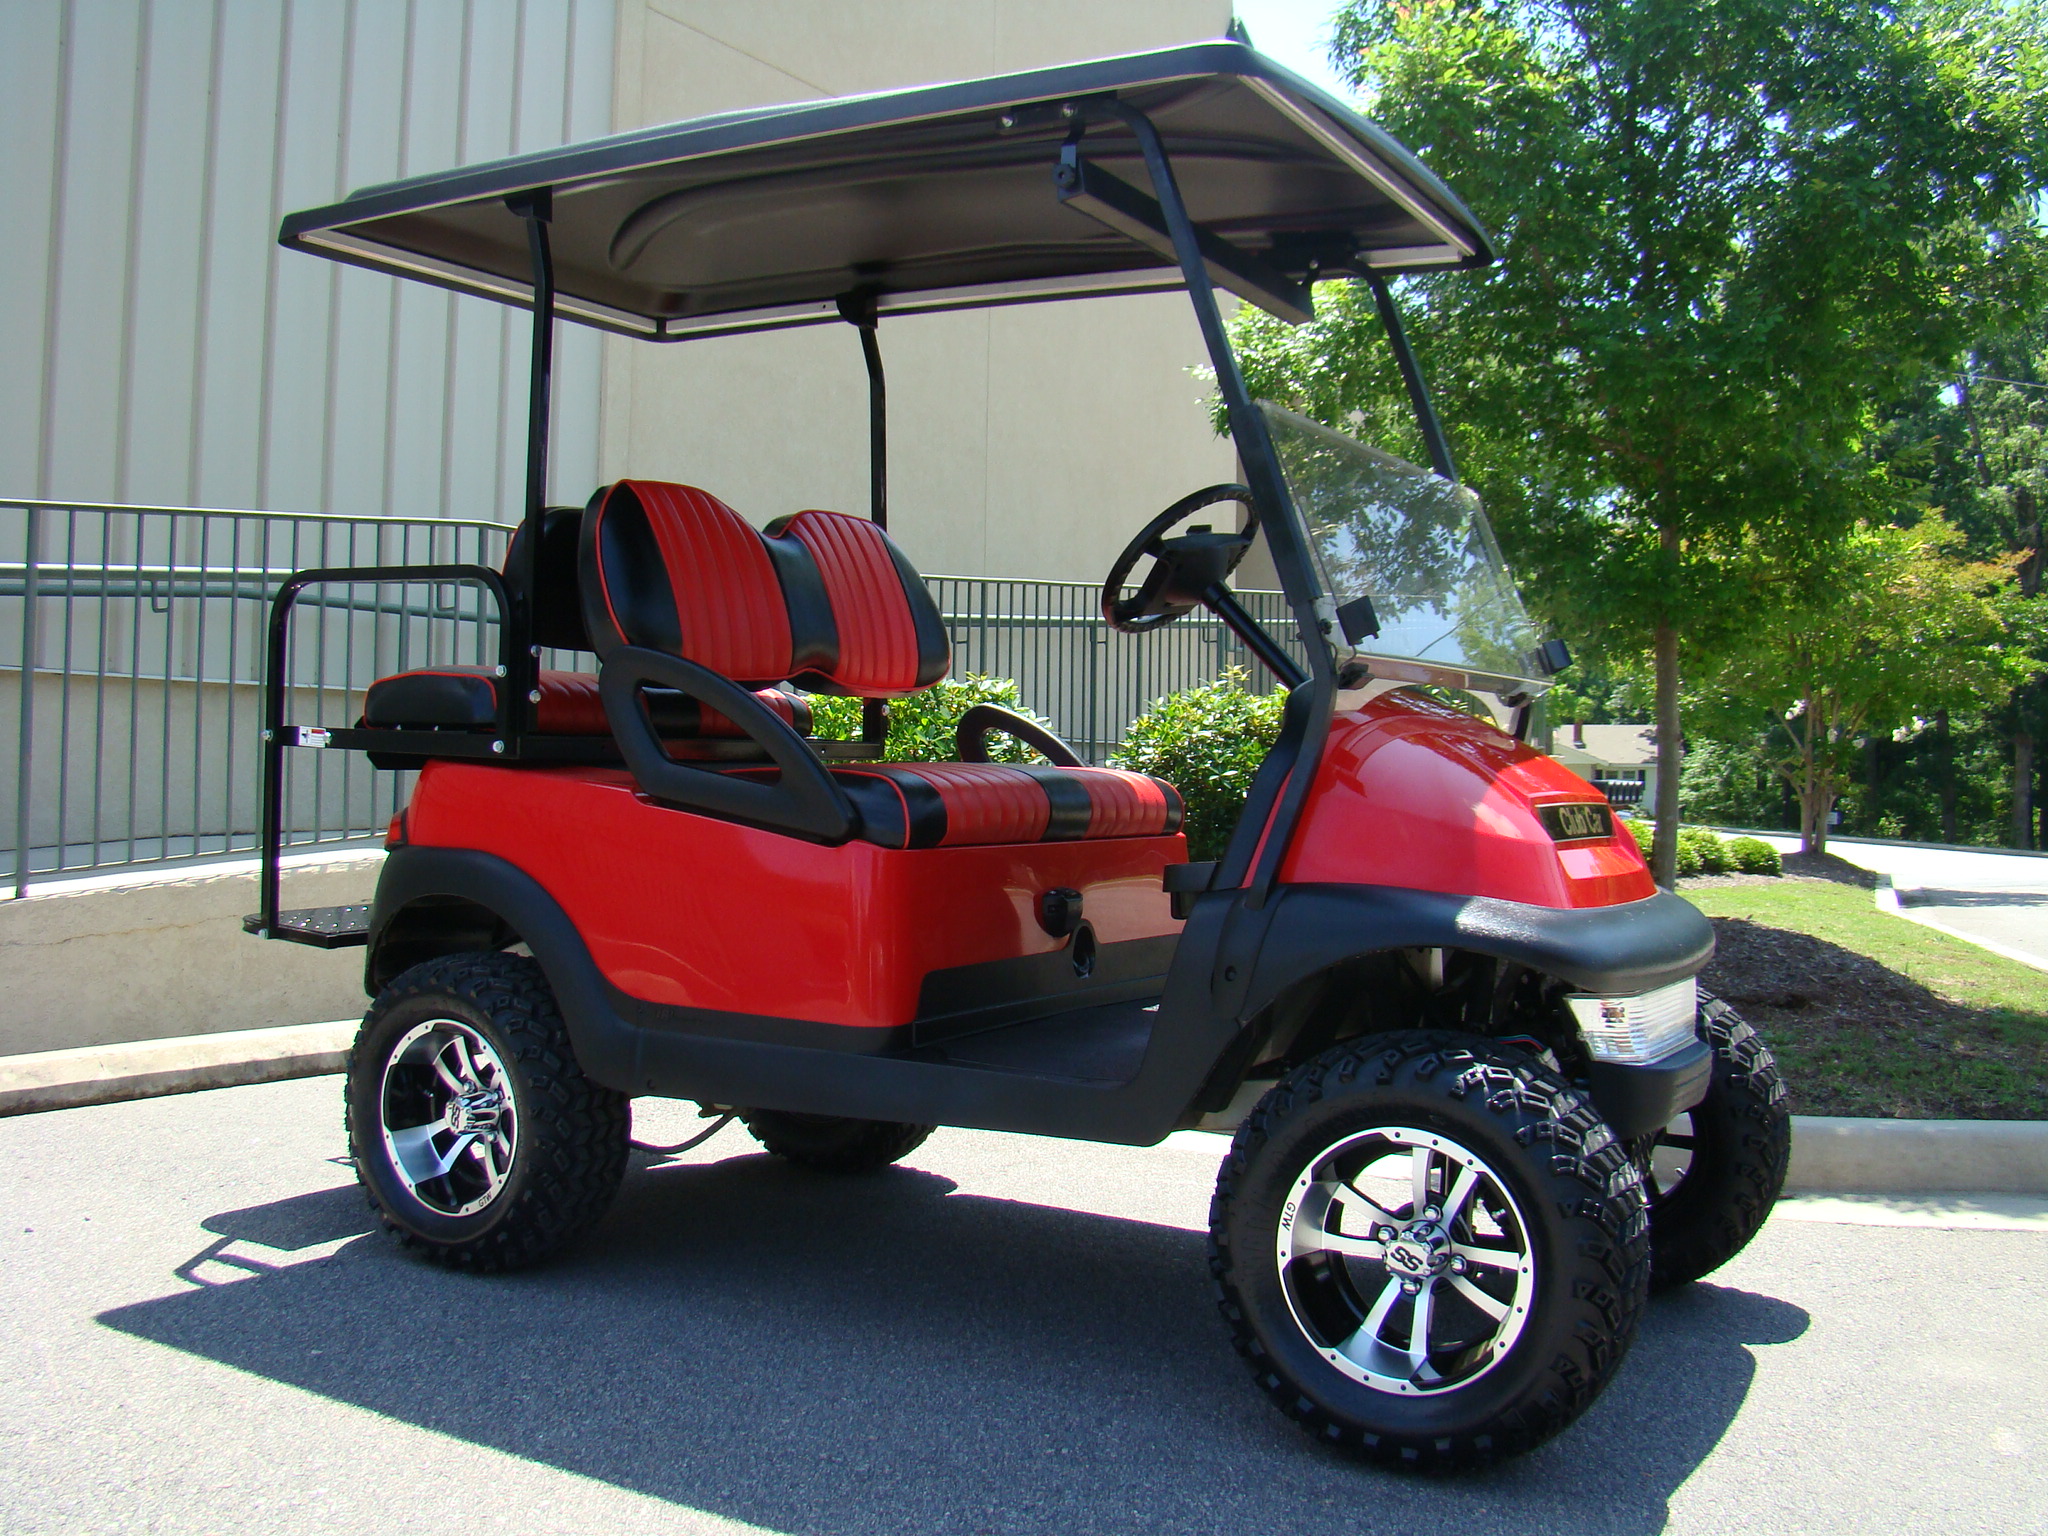 Prices for golf carts